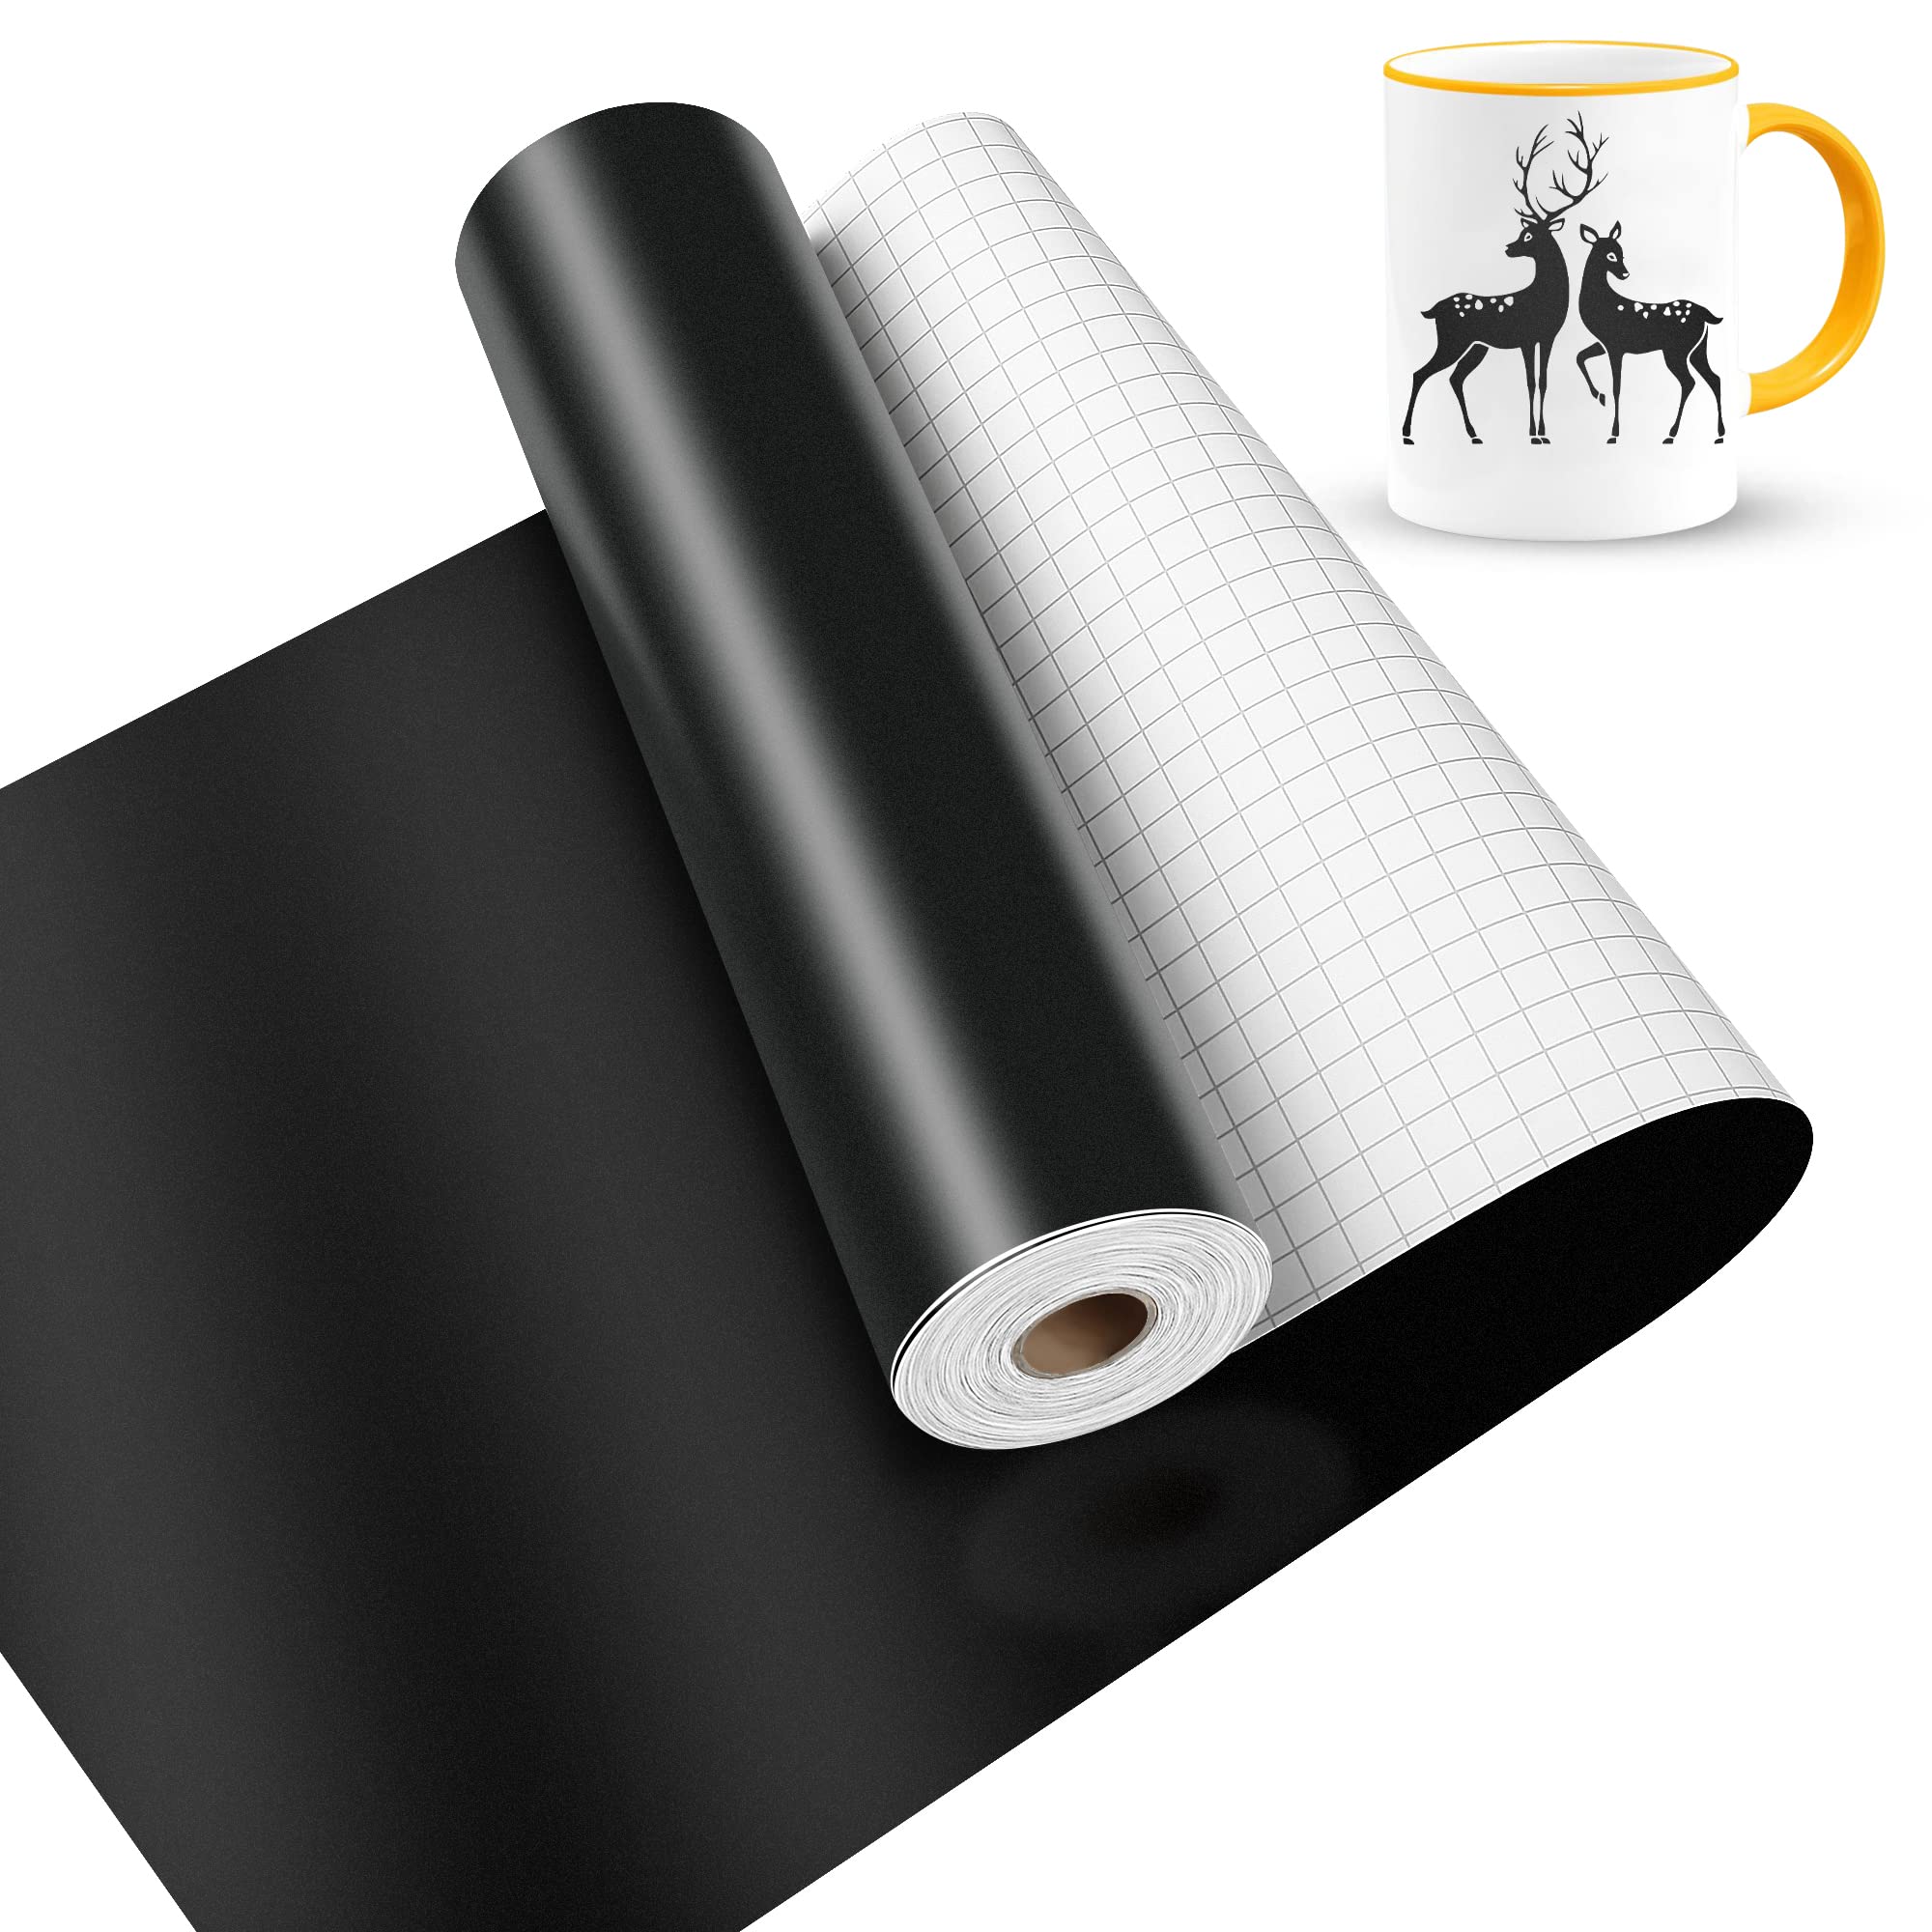  EZ Craft USA Permanent Matte White Vinyl Sheets Better Than  Vinyl Rolls 12 X 12 - 40 Matte Adhesive Backed Sheets Work with Cricut  and Other Cutters : Arts, Crafts & Sewing